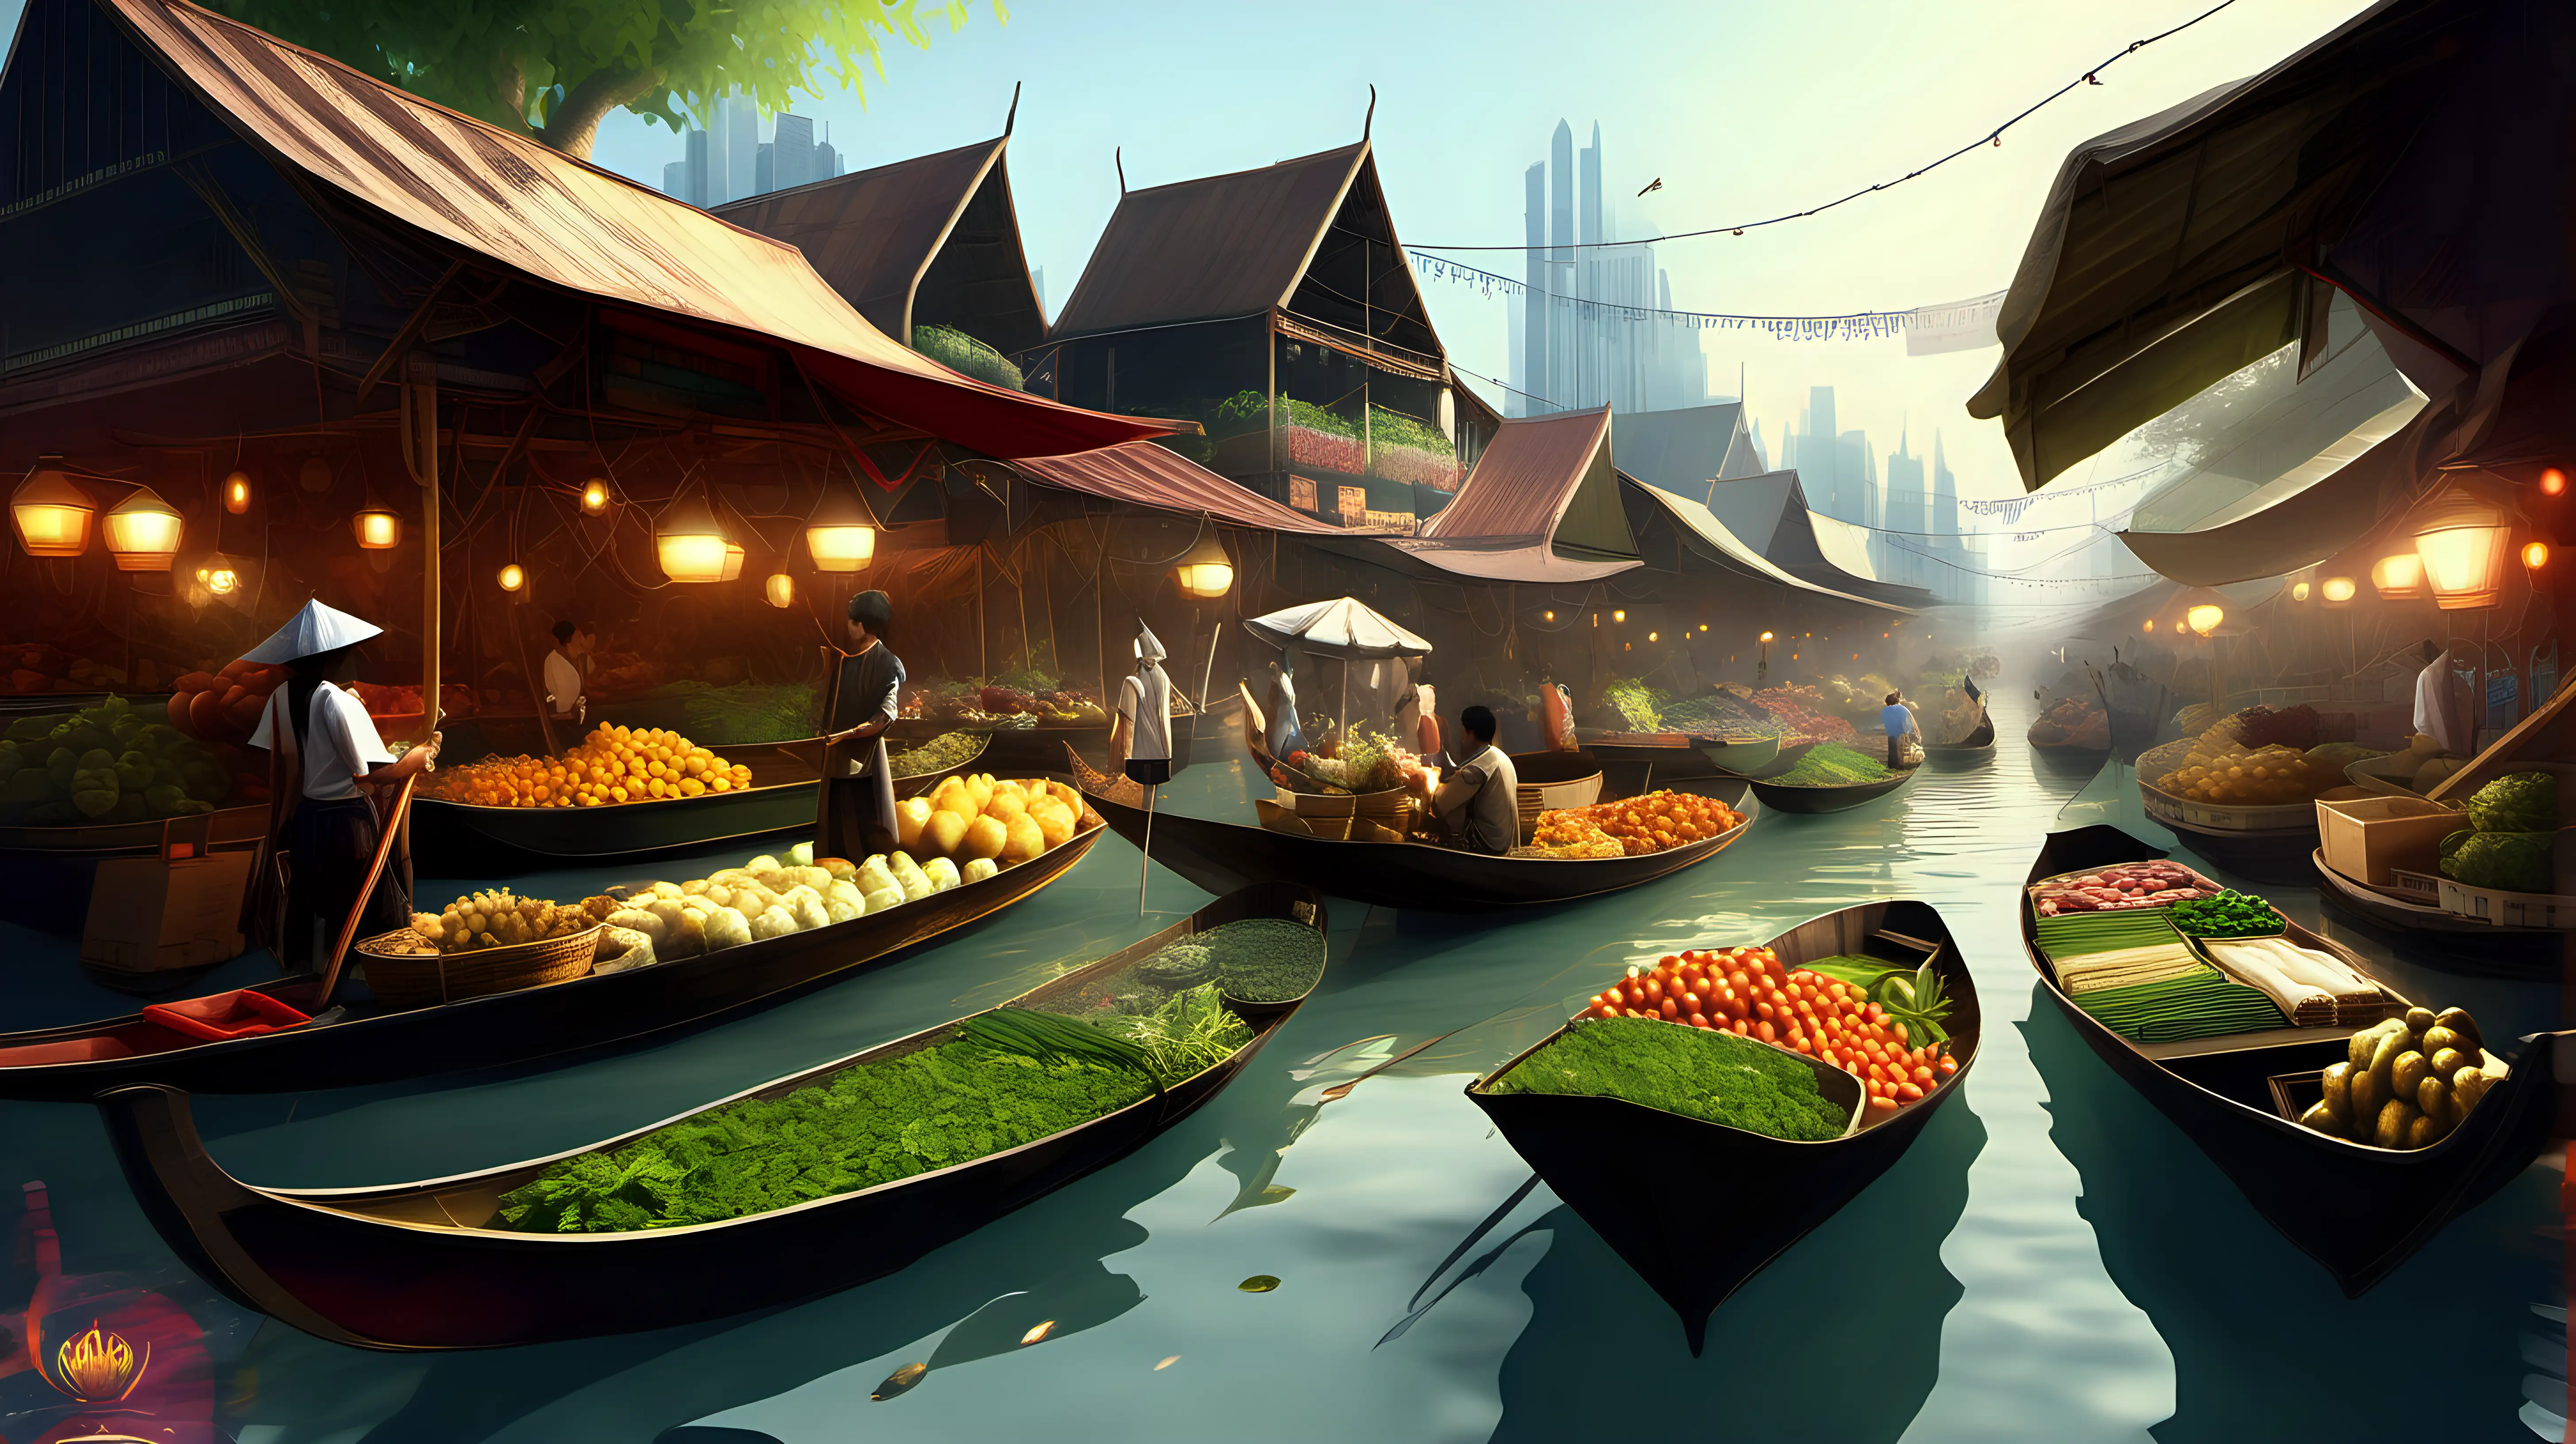 Floating market in a fantasy realm